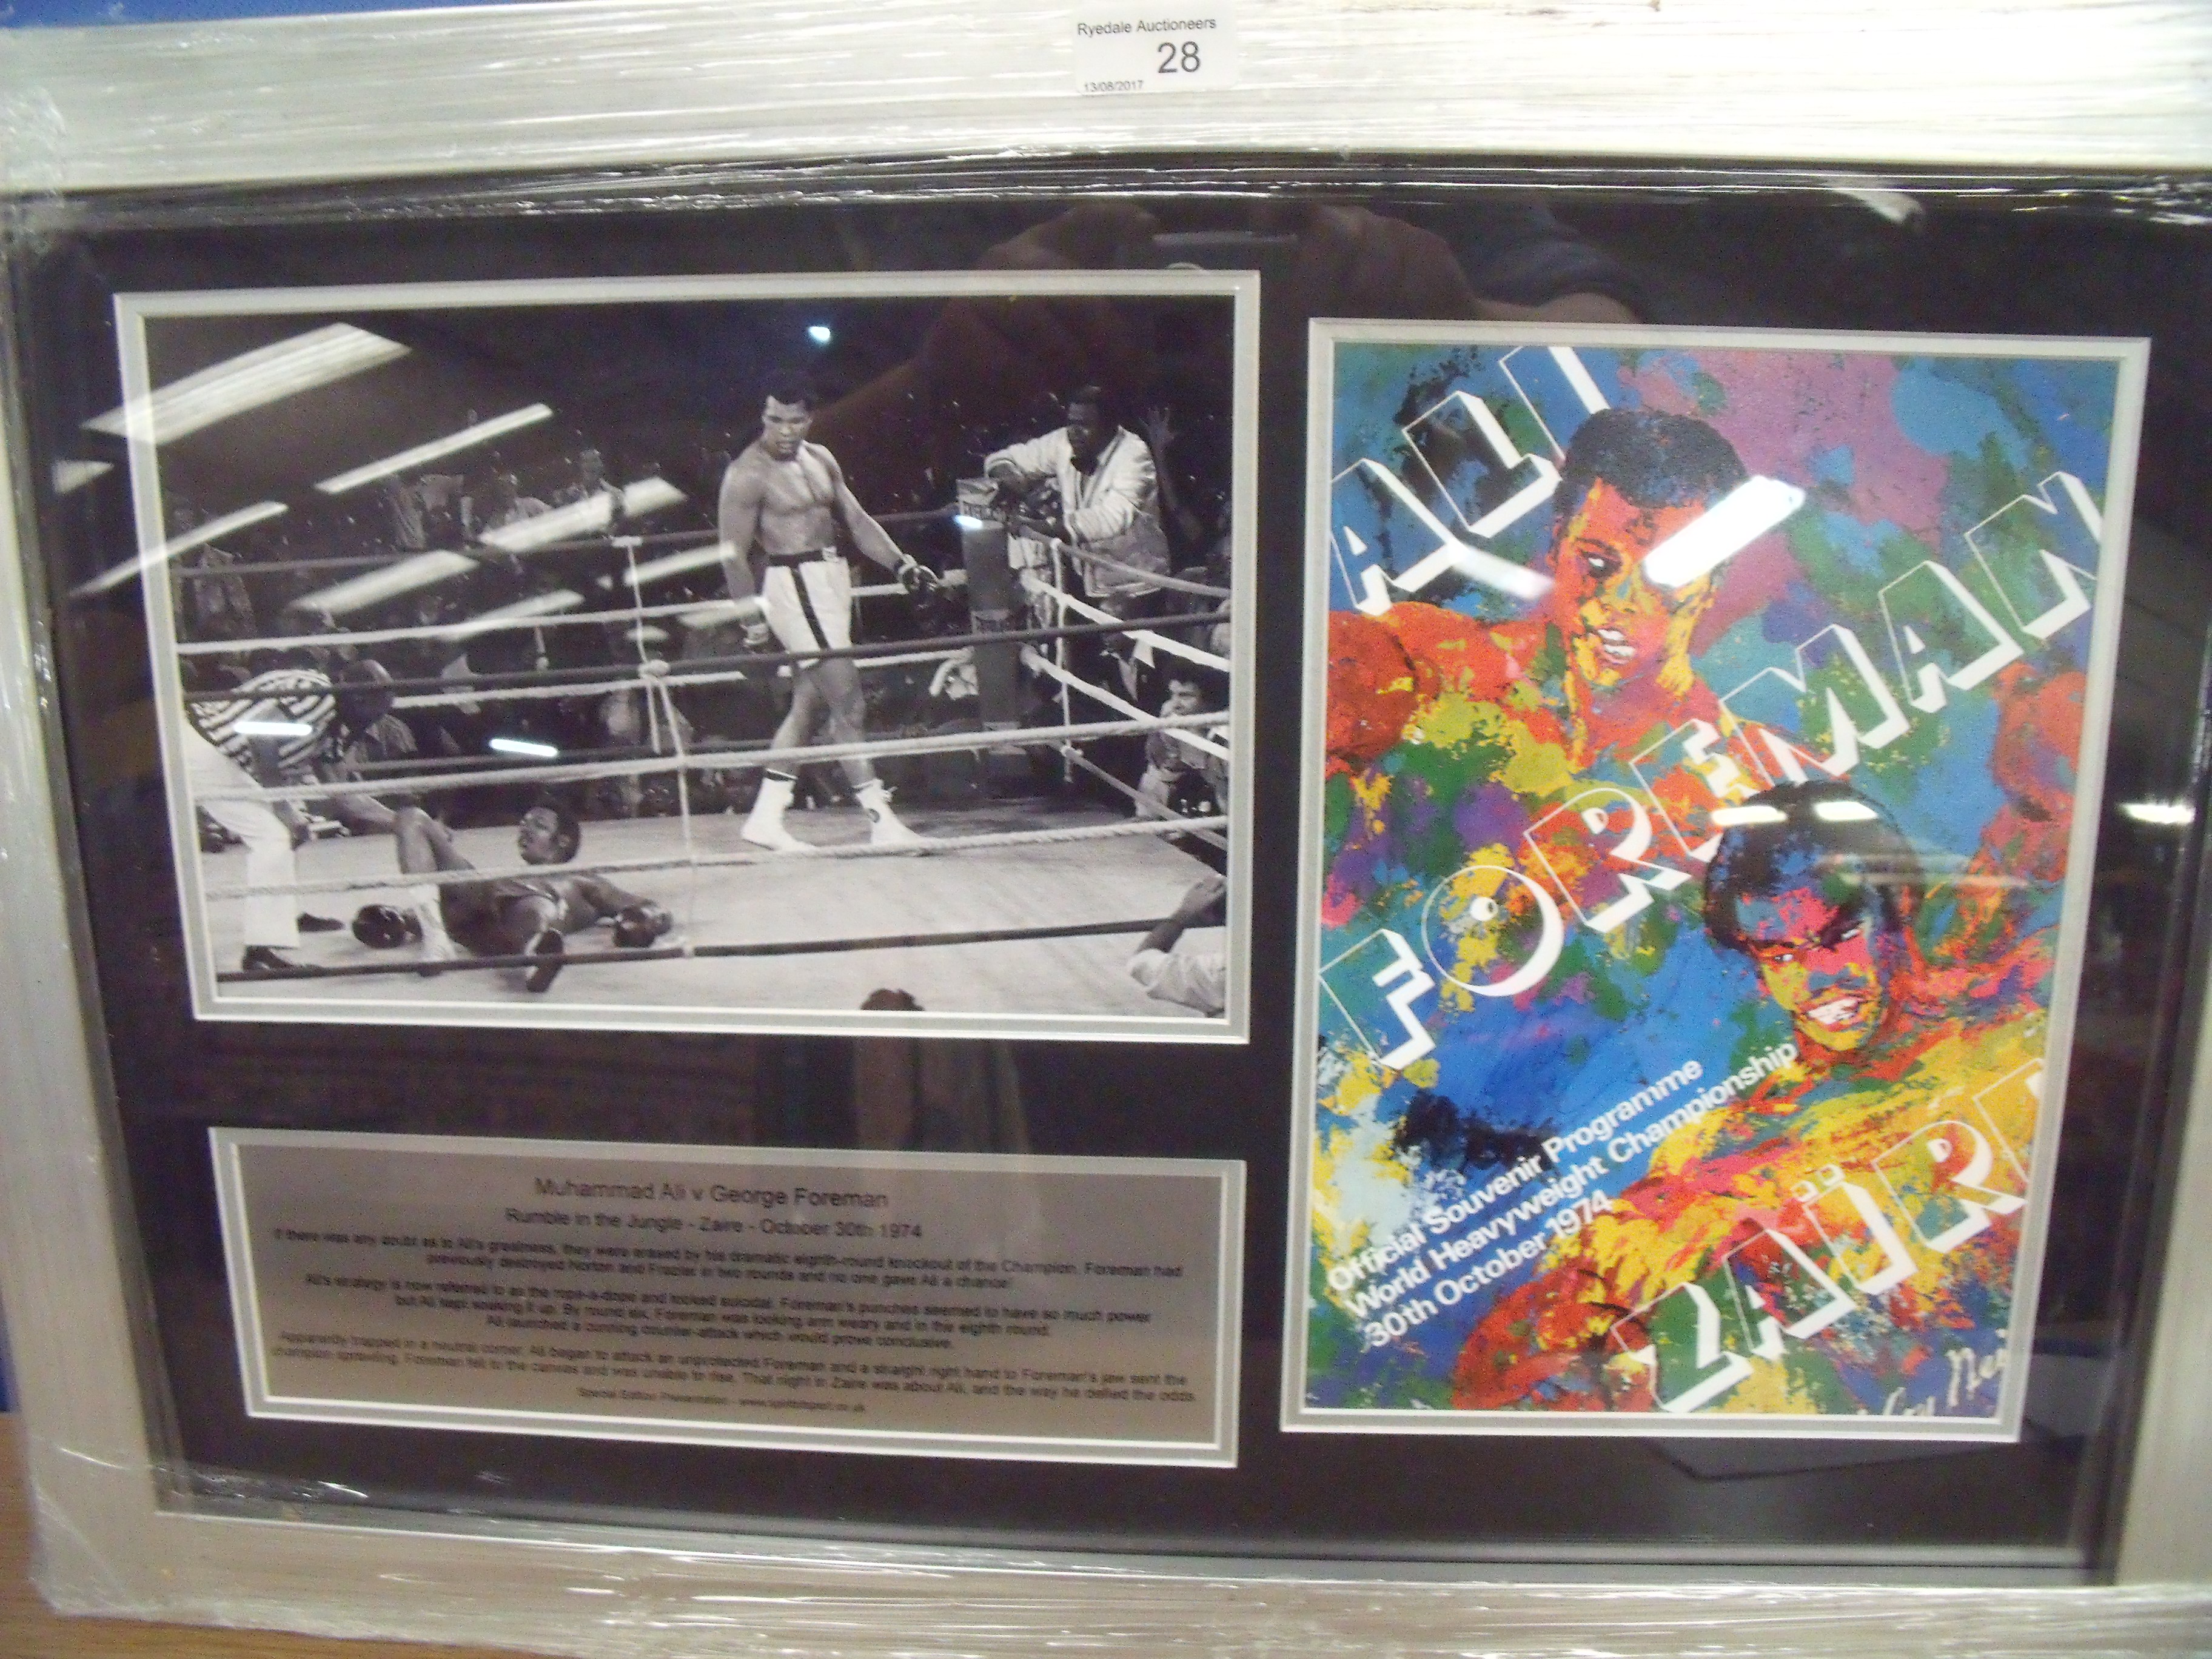 Framed and mounted Mohammed Ali, Foreman